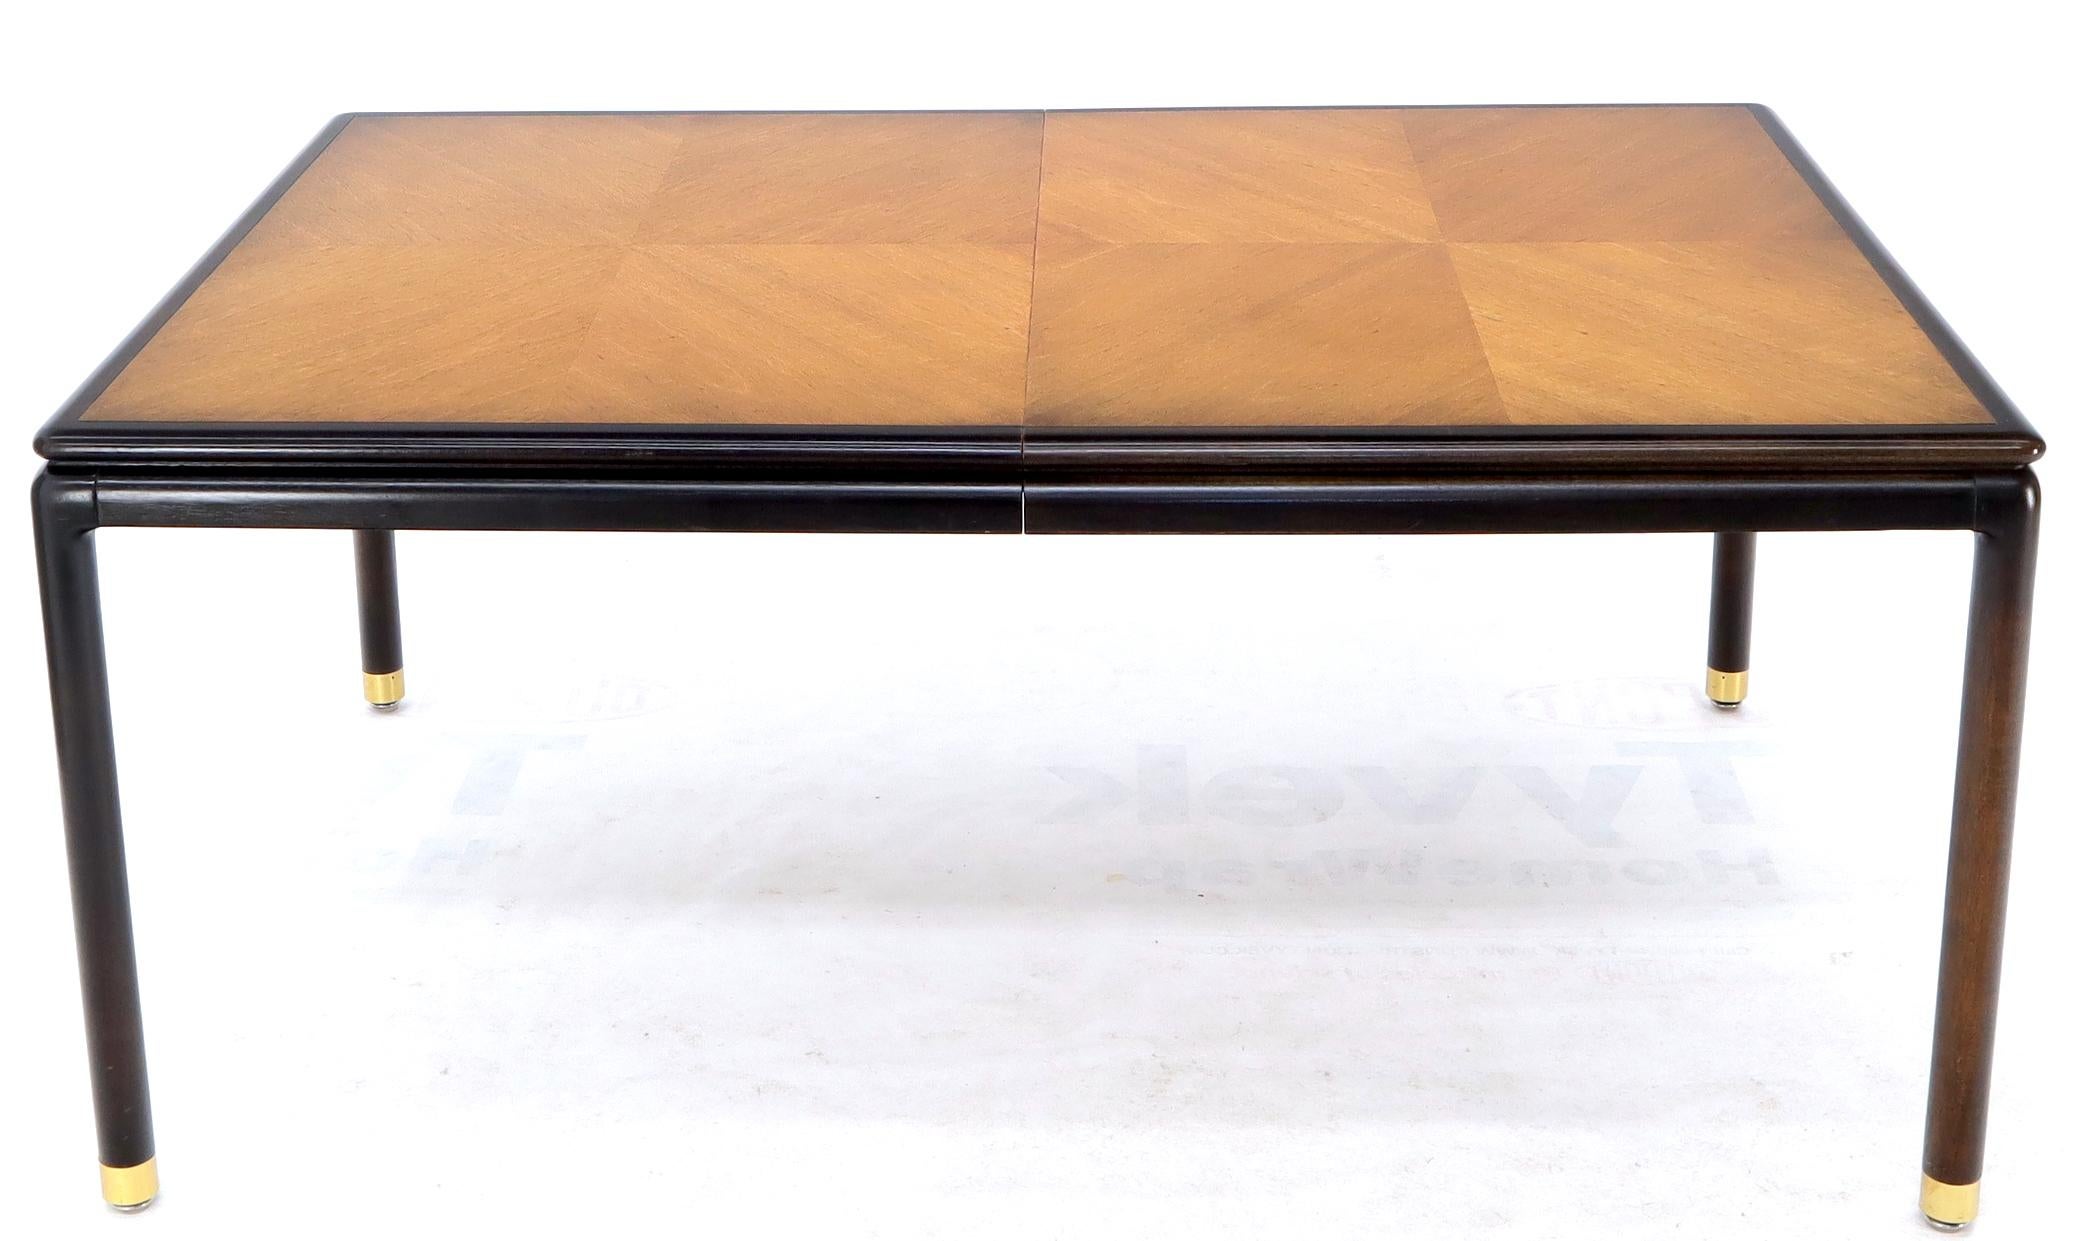 Danish Mid-Century Modern Large Two-Tone Dining Room Table with 2 Leaves For Sale 2